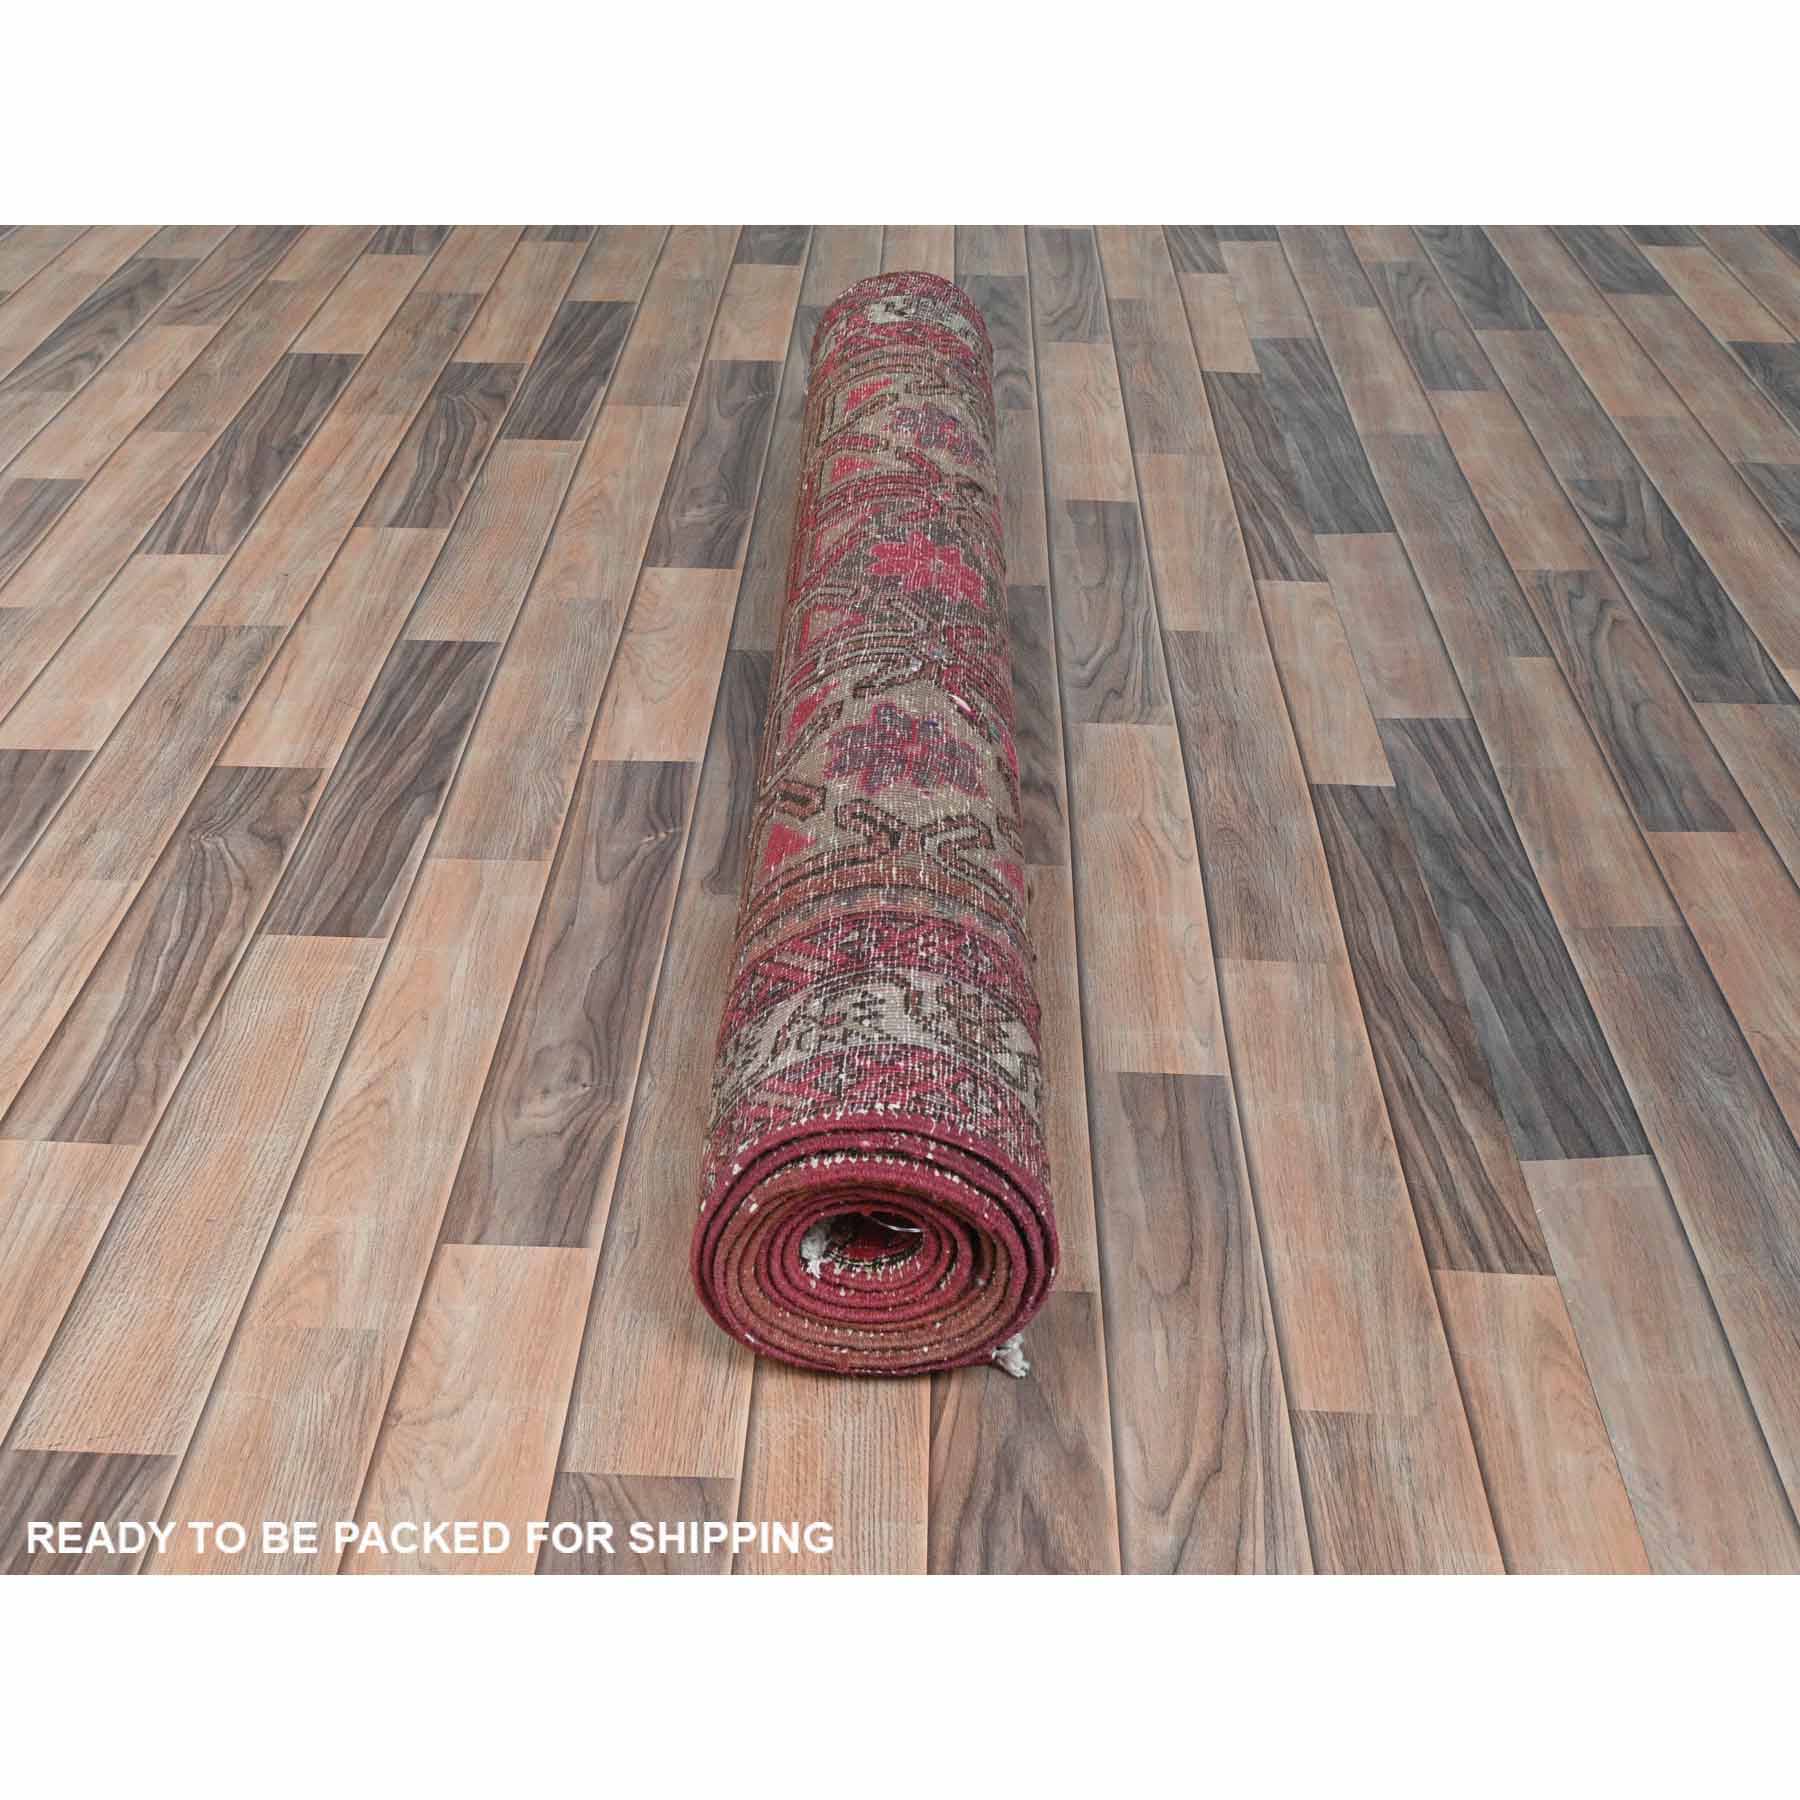 Overdyed-Vintage-Hand-Knotted-Rug-409300